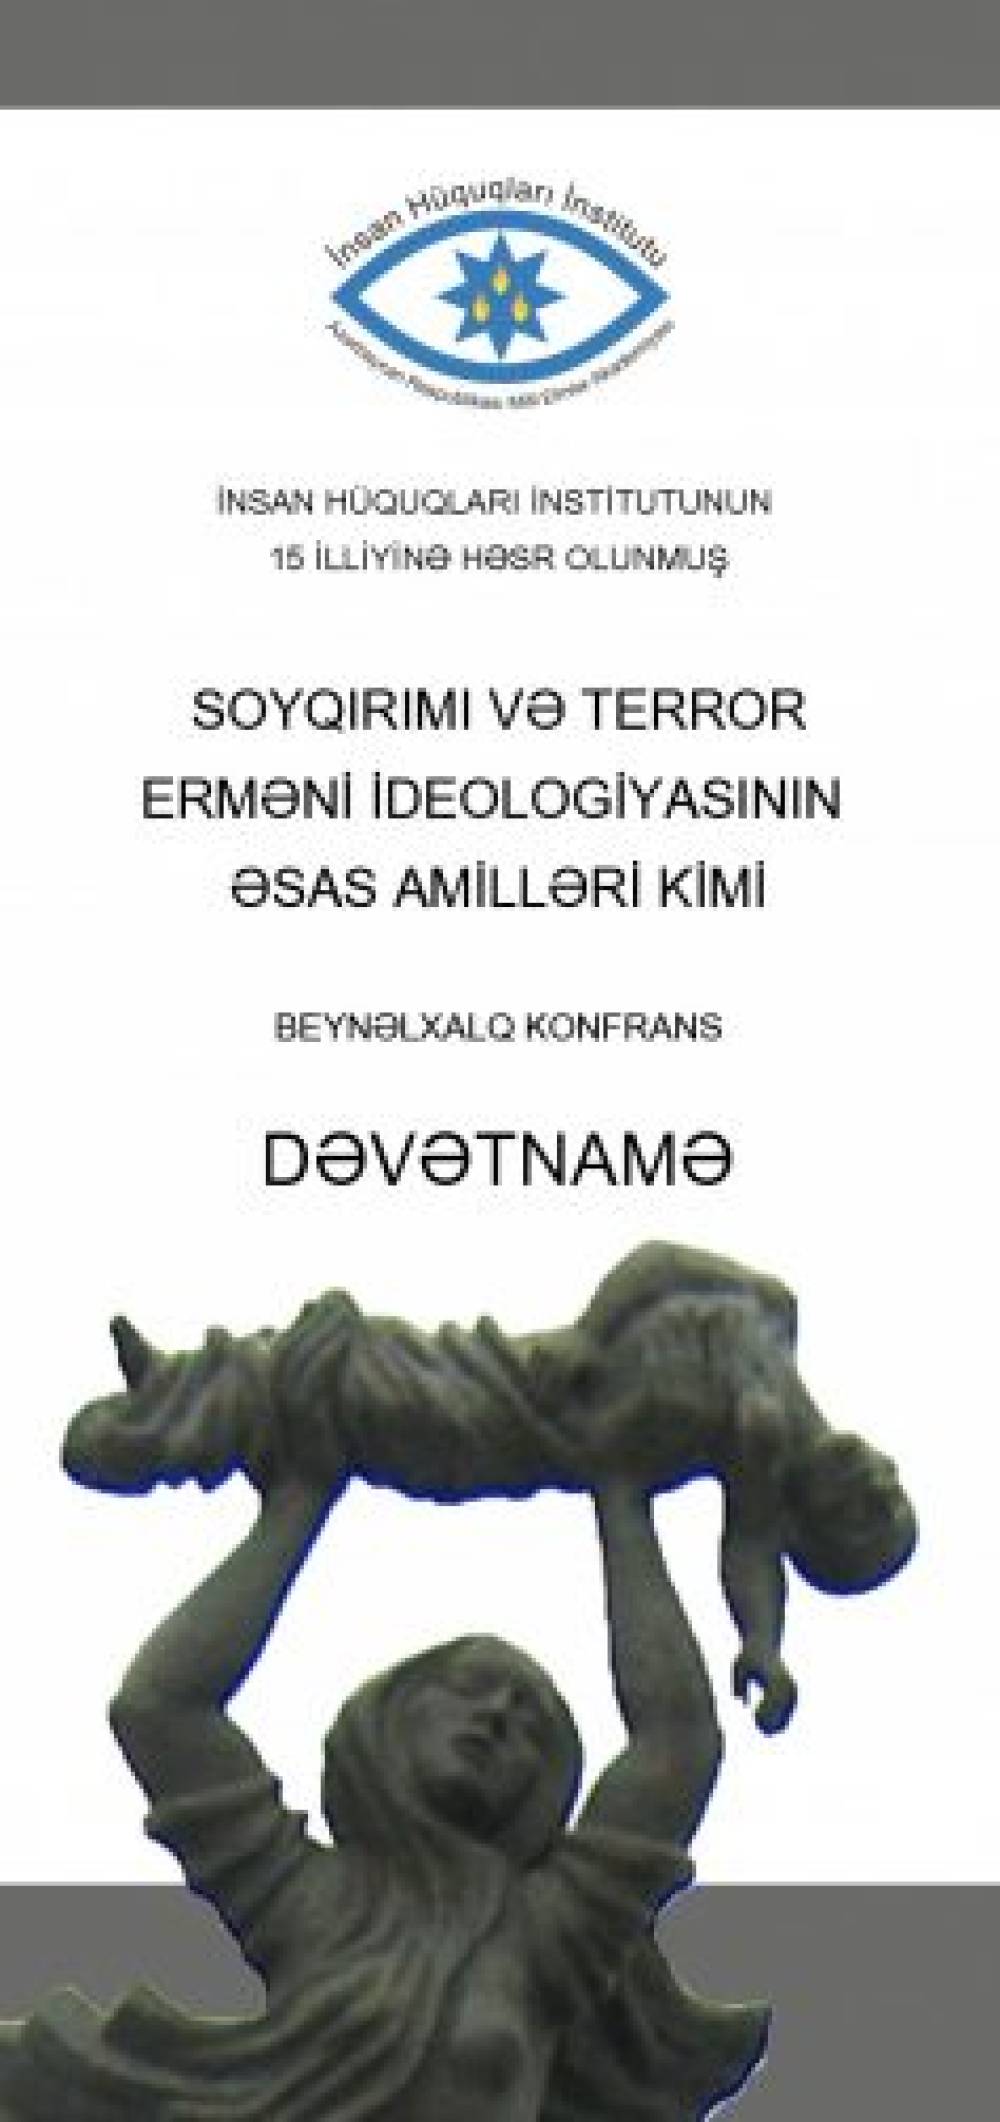 Genocide and terror as the main factors of armenian ideology